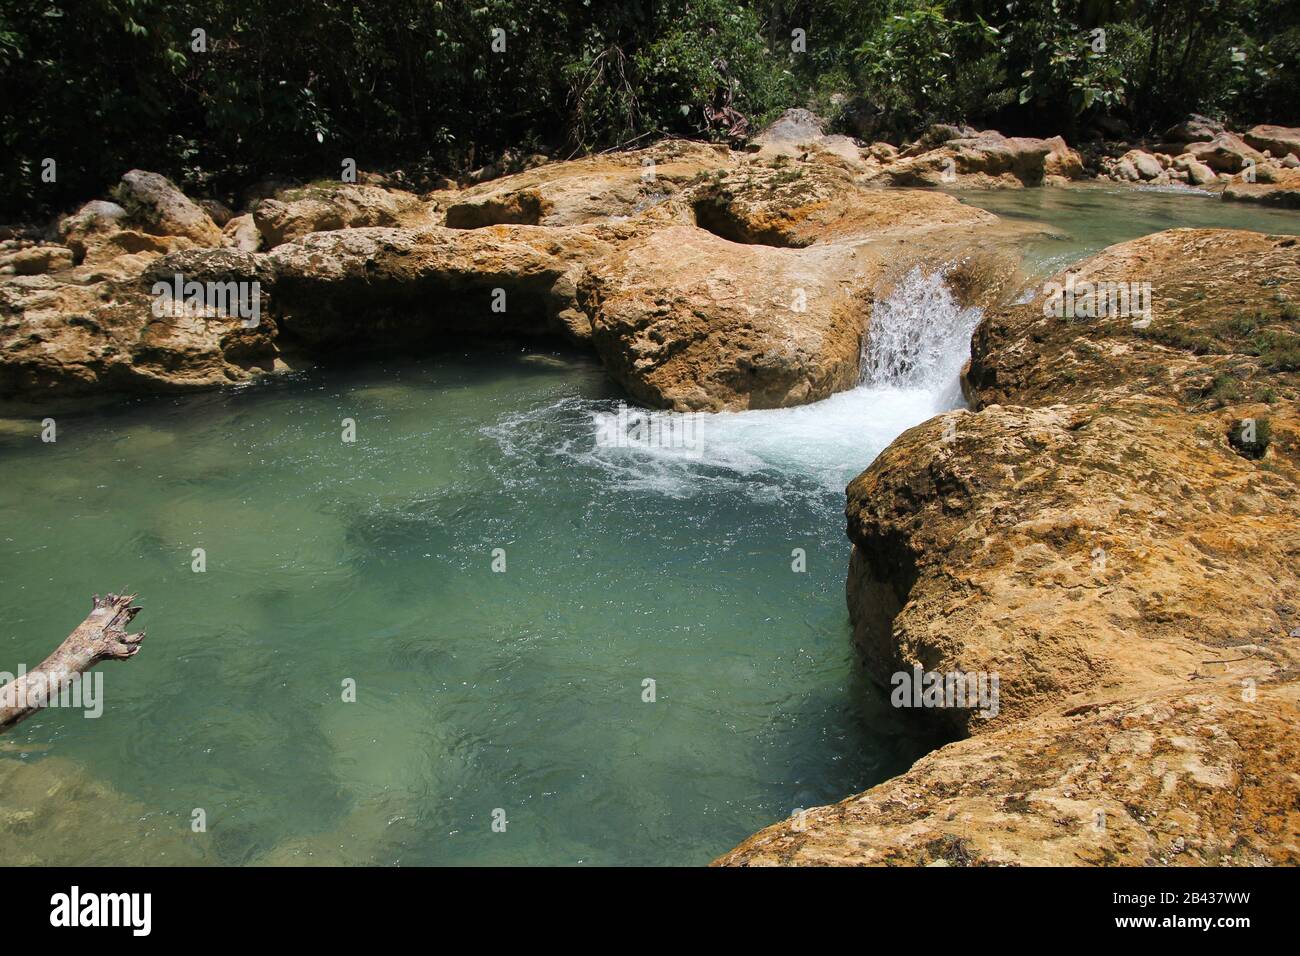 Clear pool from the flowing waters of Baobao Falls, an attraction in Liangga, Surigao del Sur, Philippines. Stock Photo